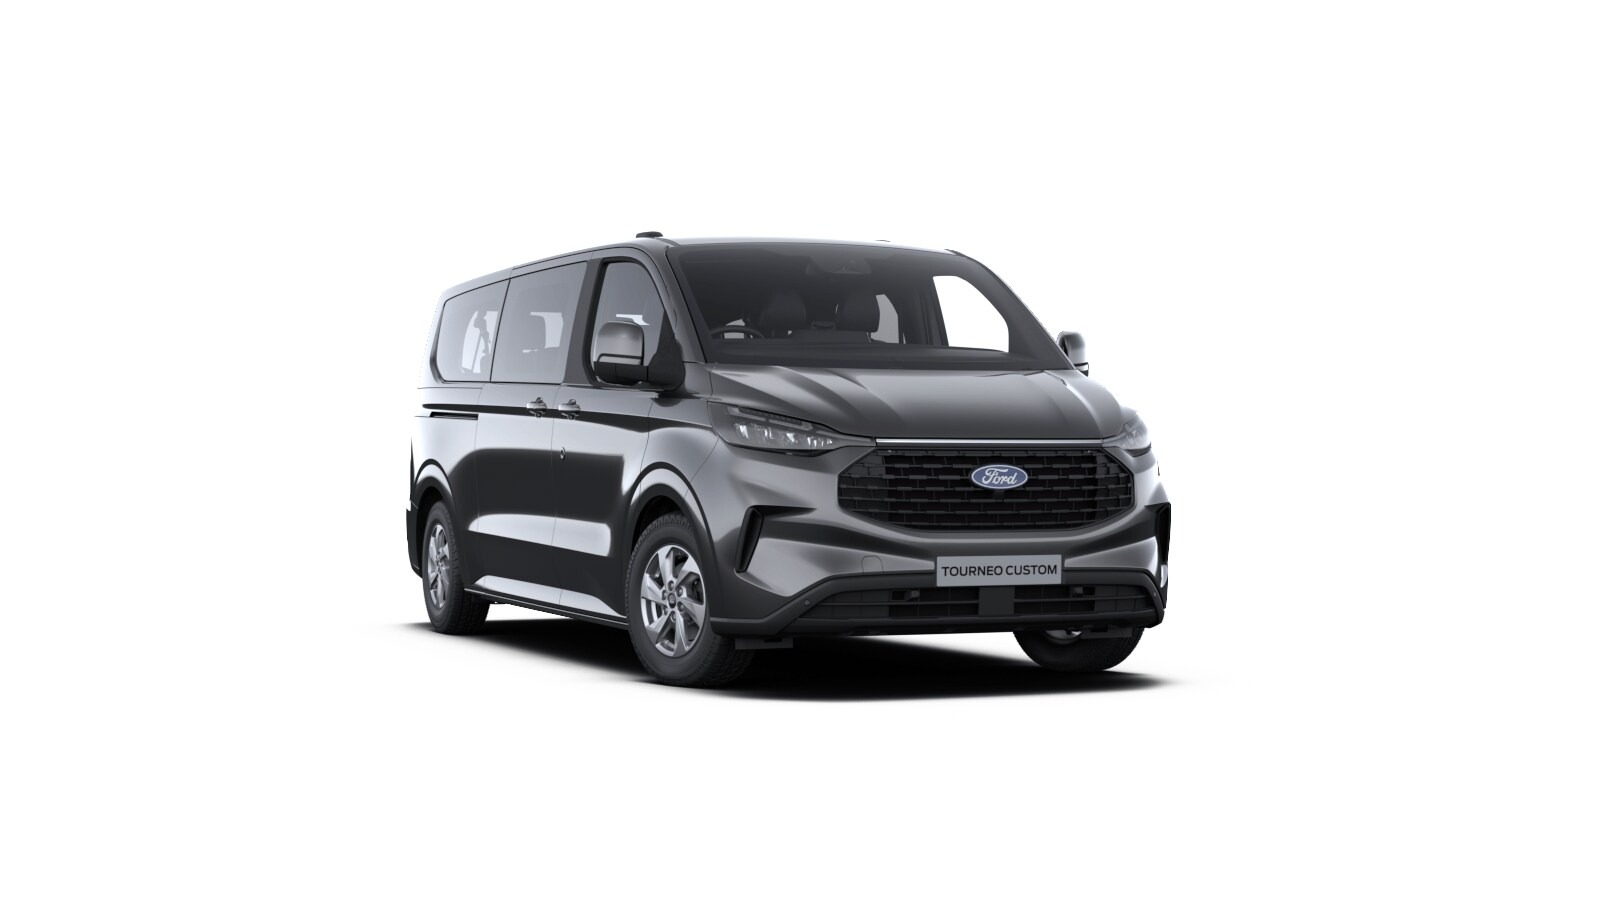 All-New Ford Tourneo Custom - Magnetic